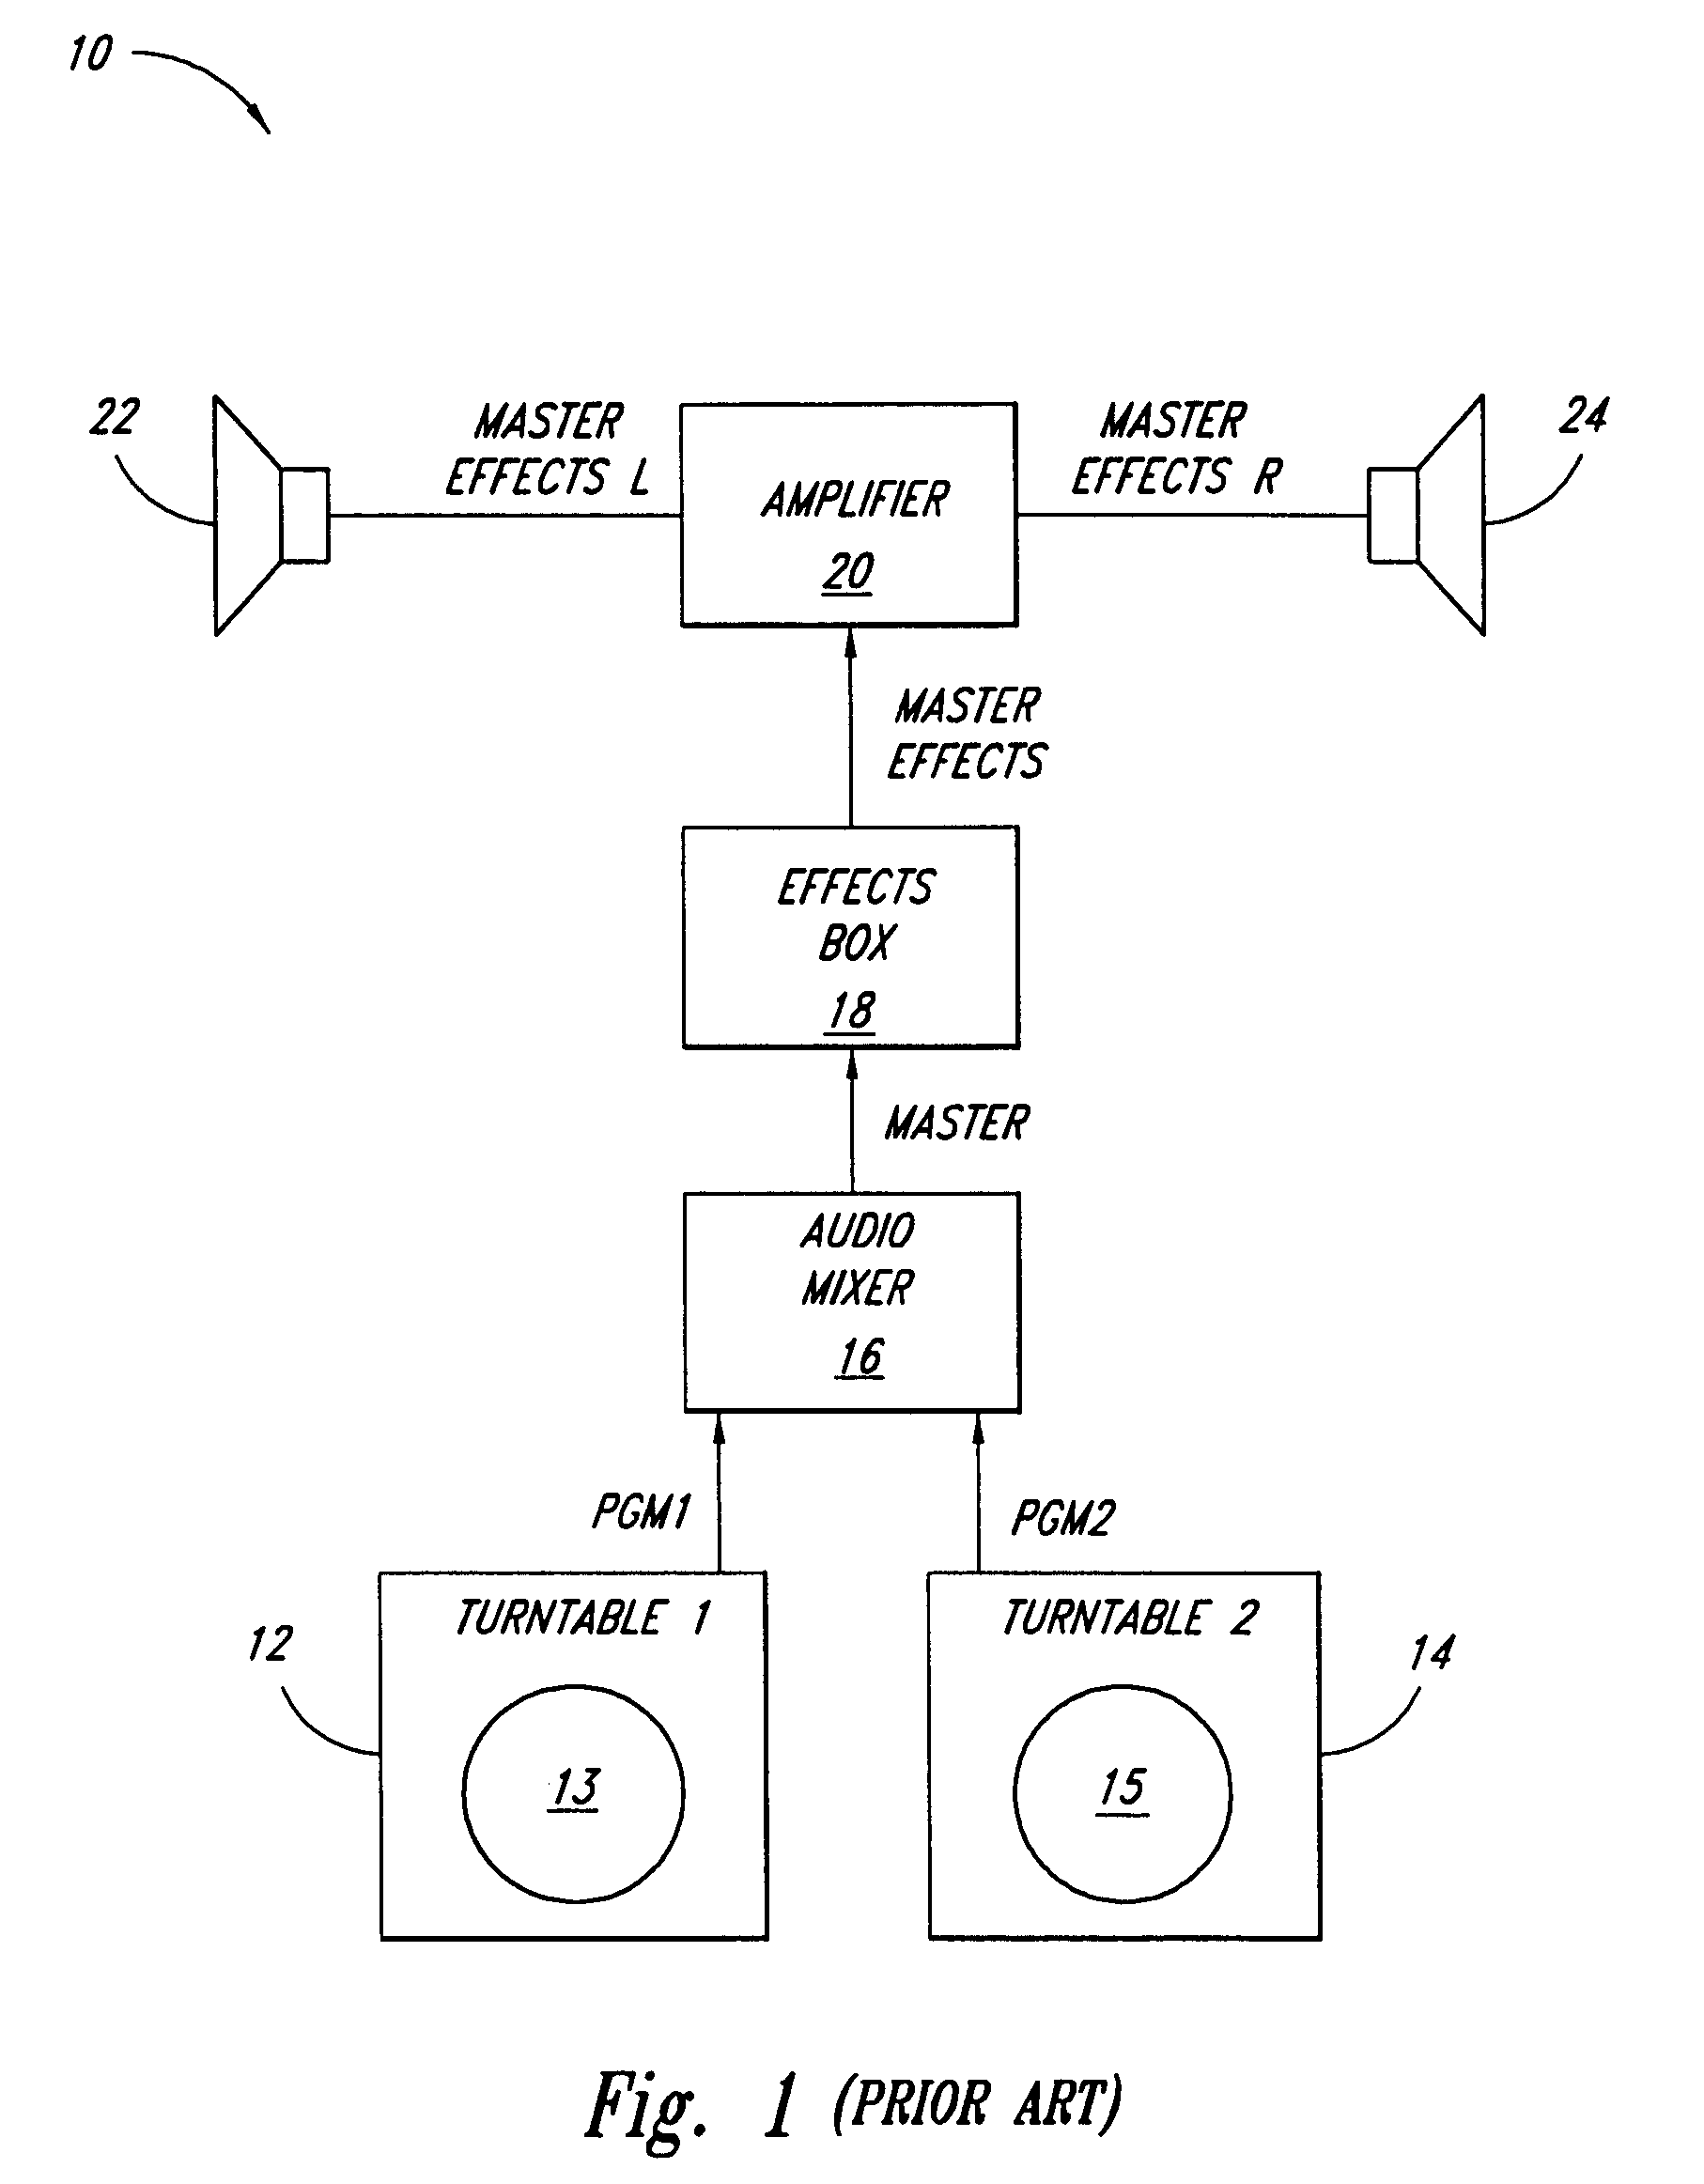 Tone-control circuit and method for conditioning respective frequency bands of an audio signal